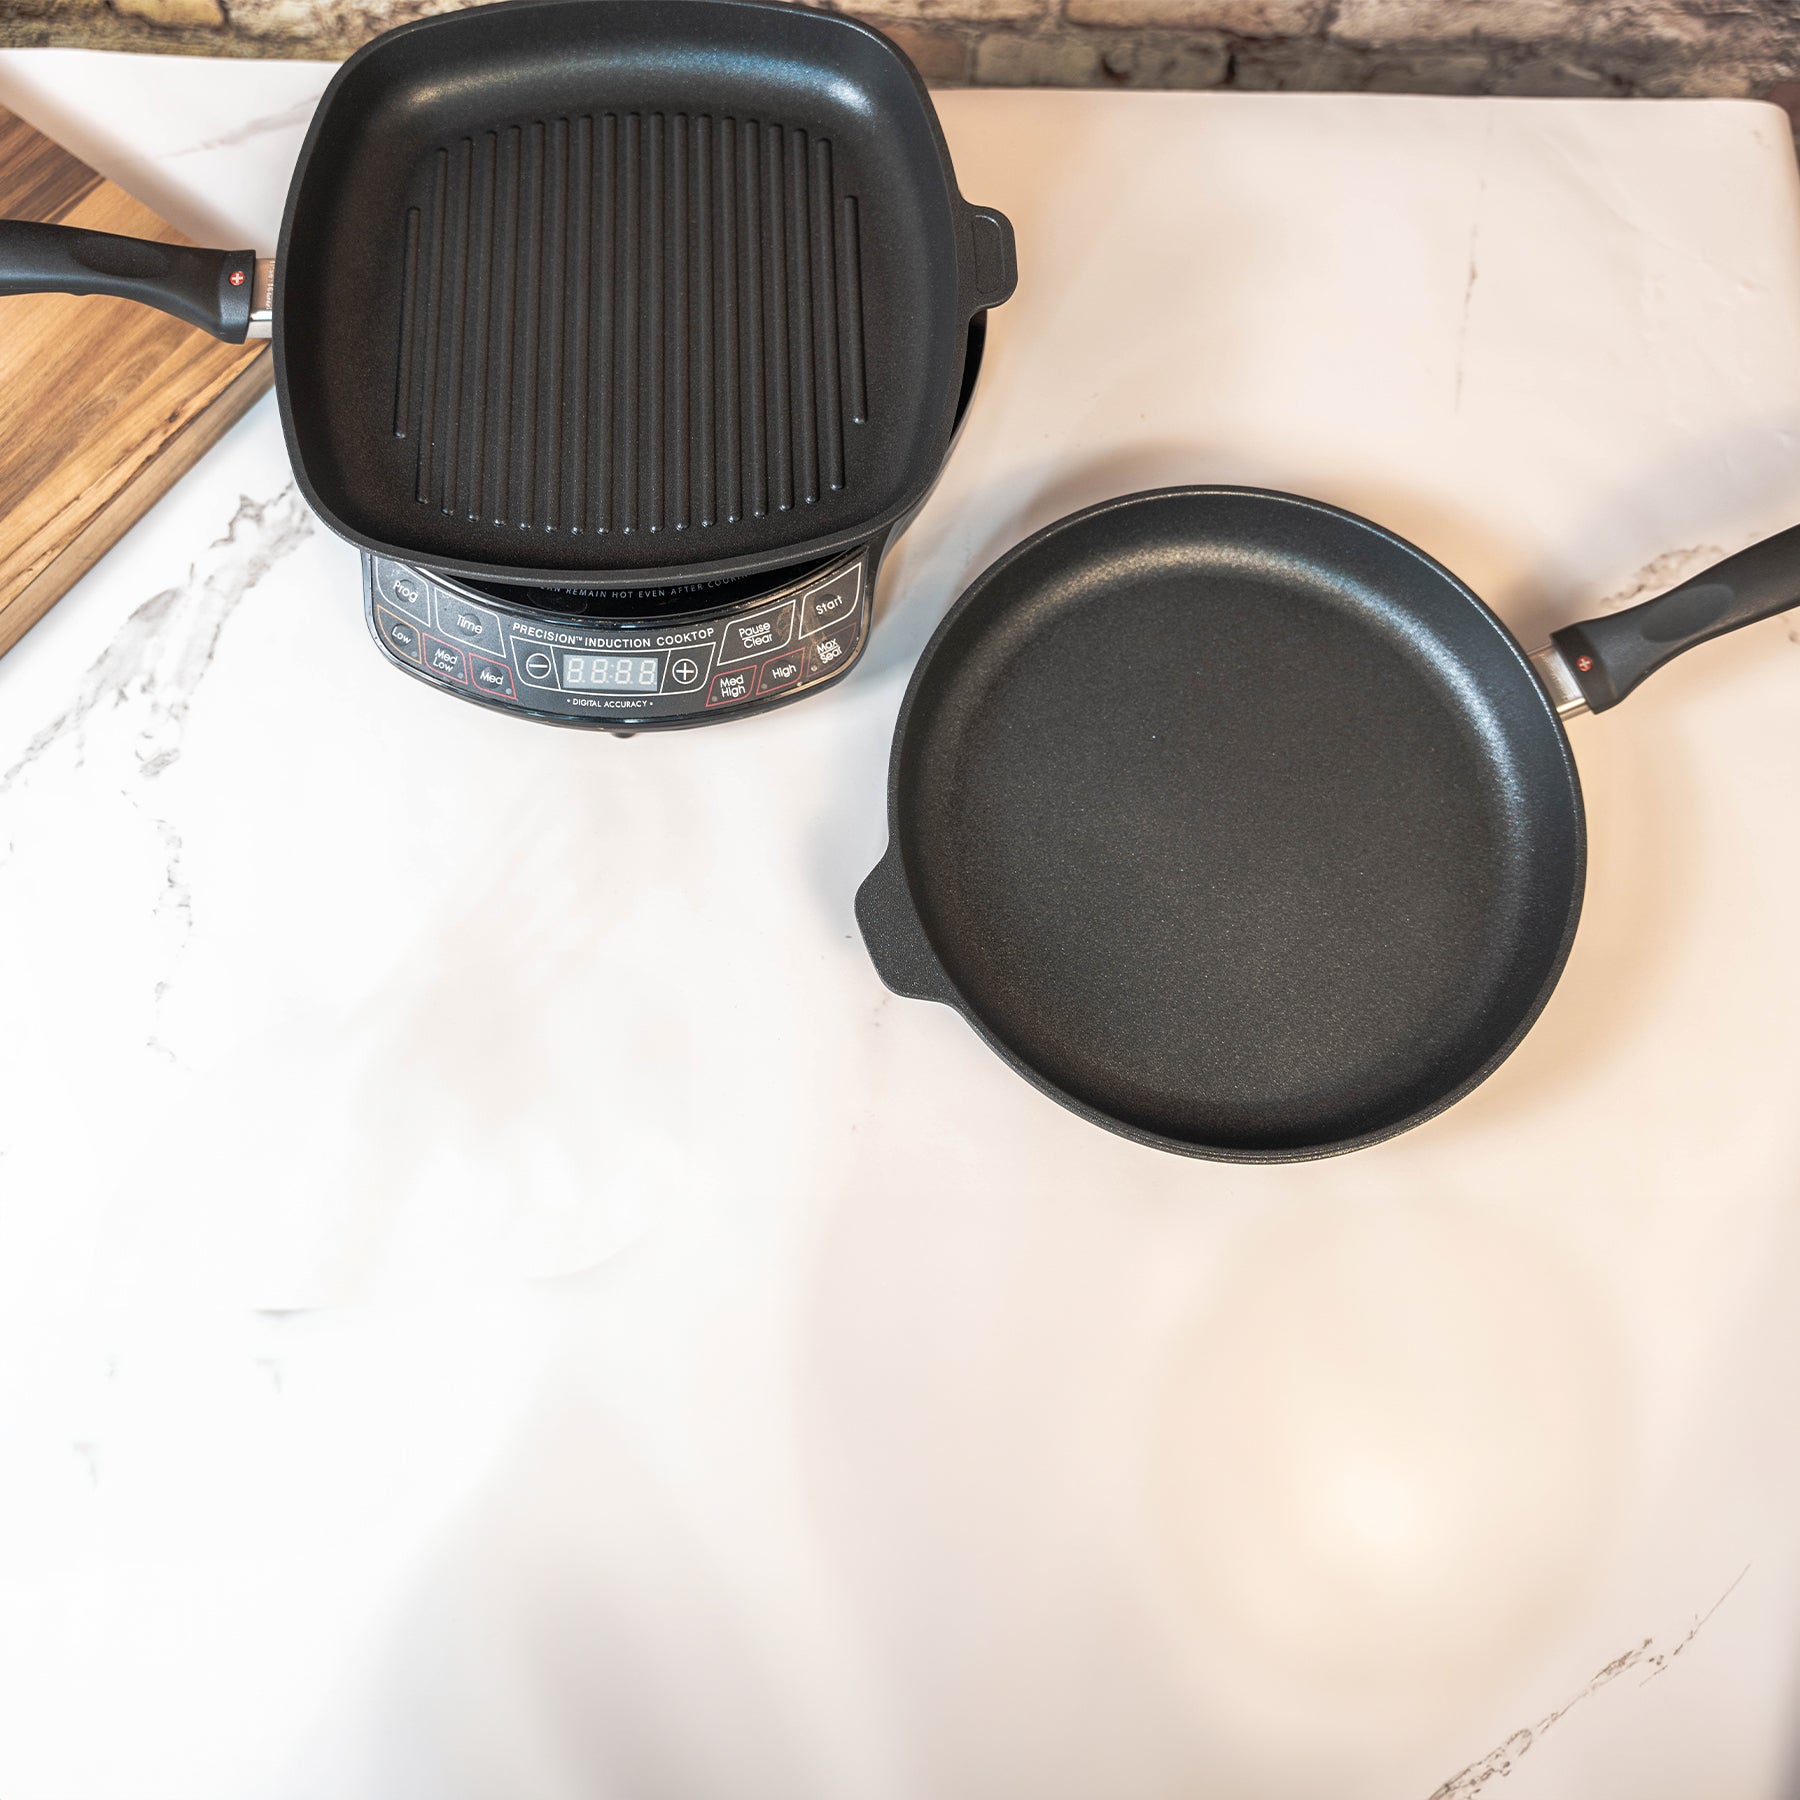 XD Nonstick 2-Piece Set - Fry Pan & Grill Pan - Induction in use on hot plate on kitchen counter